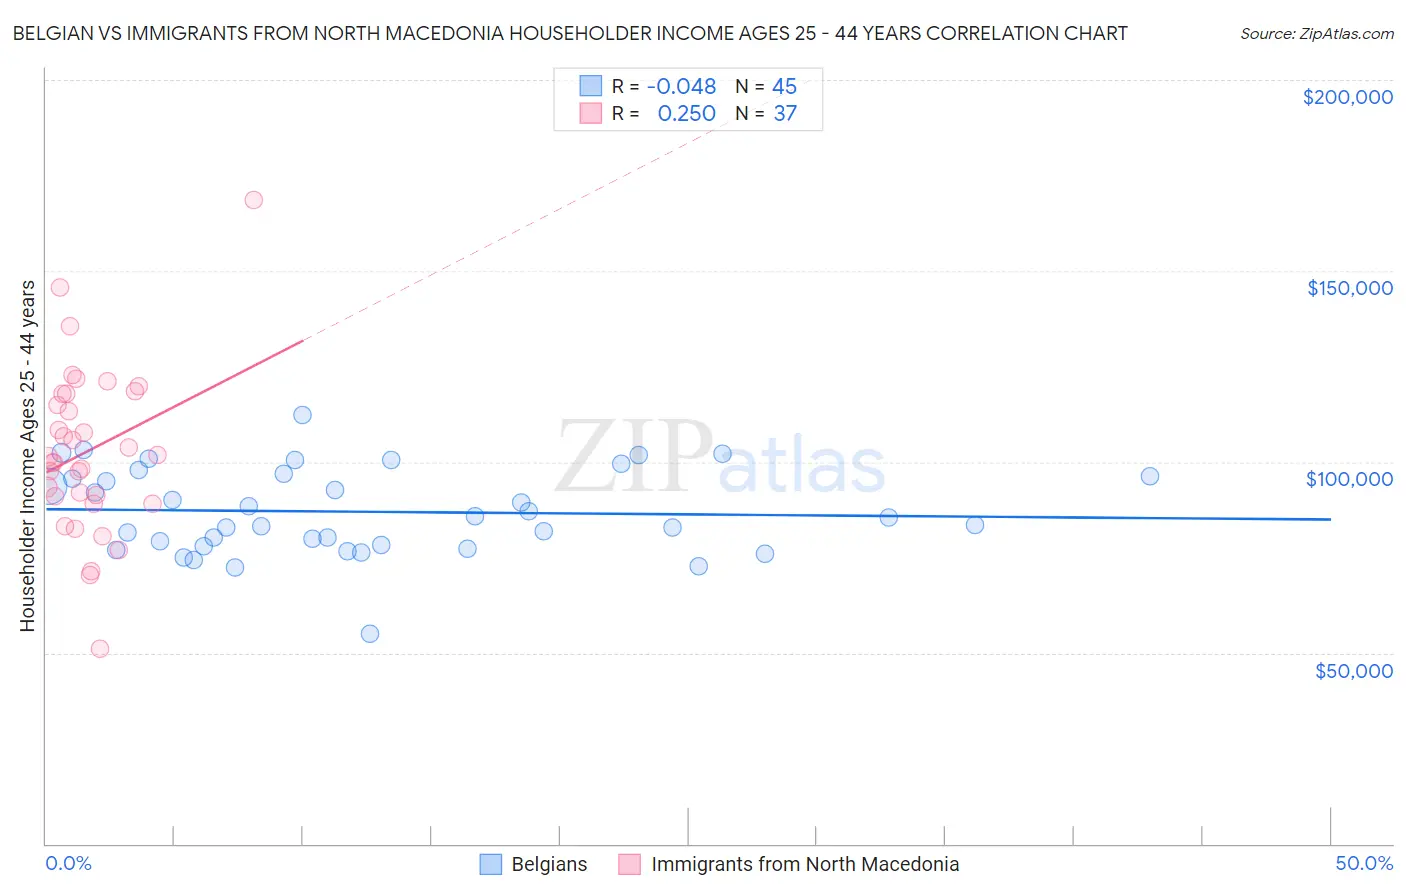 Belgian vs Immigrants from North Macedonia Householder Income Ages 25 - 44 years